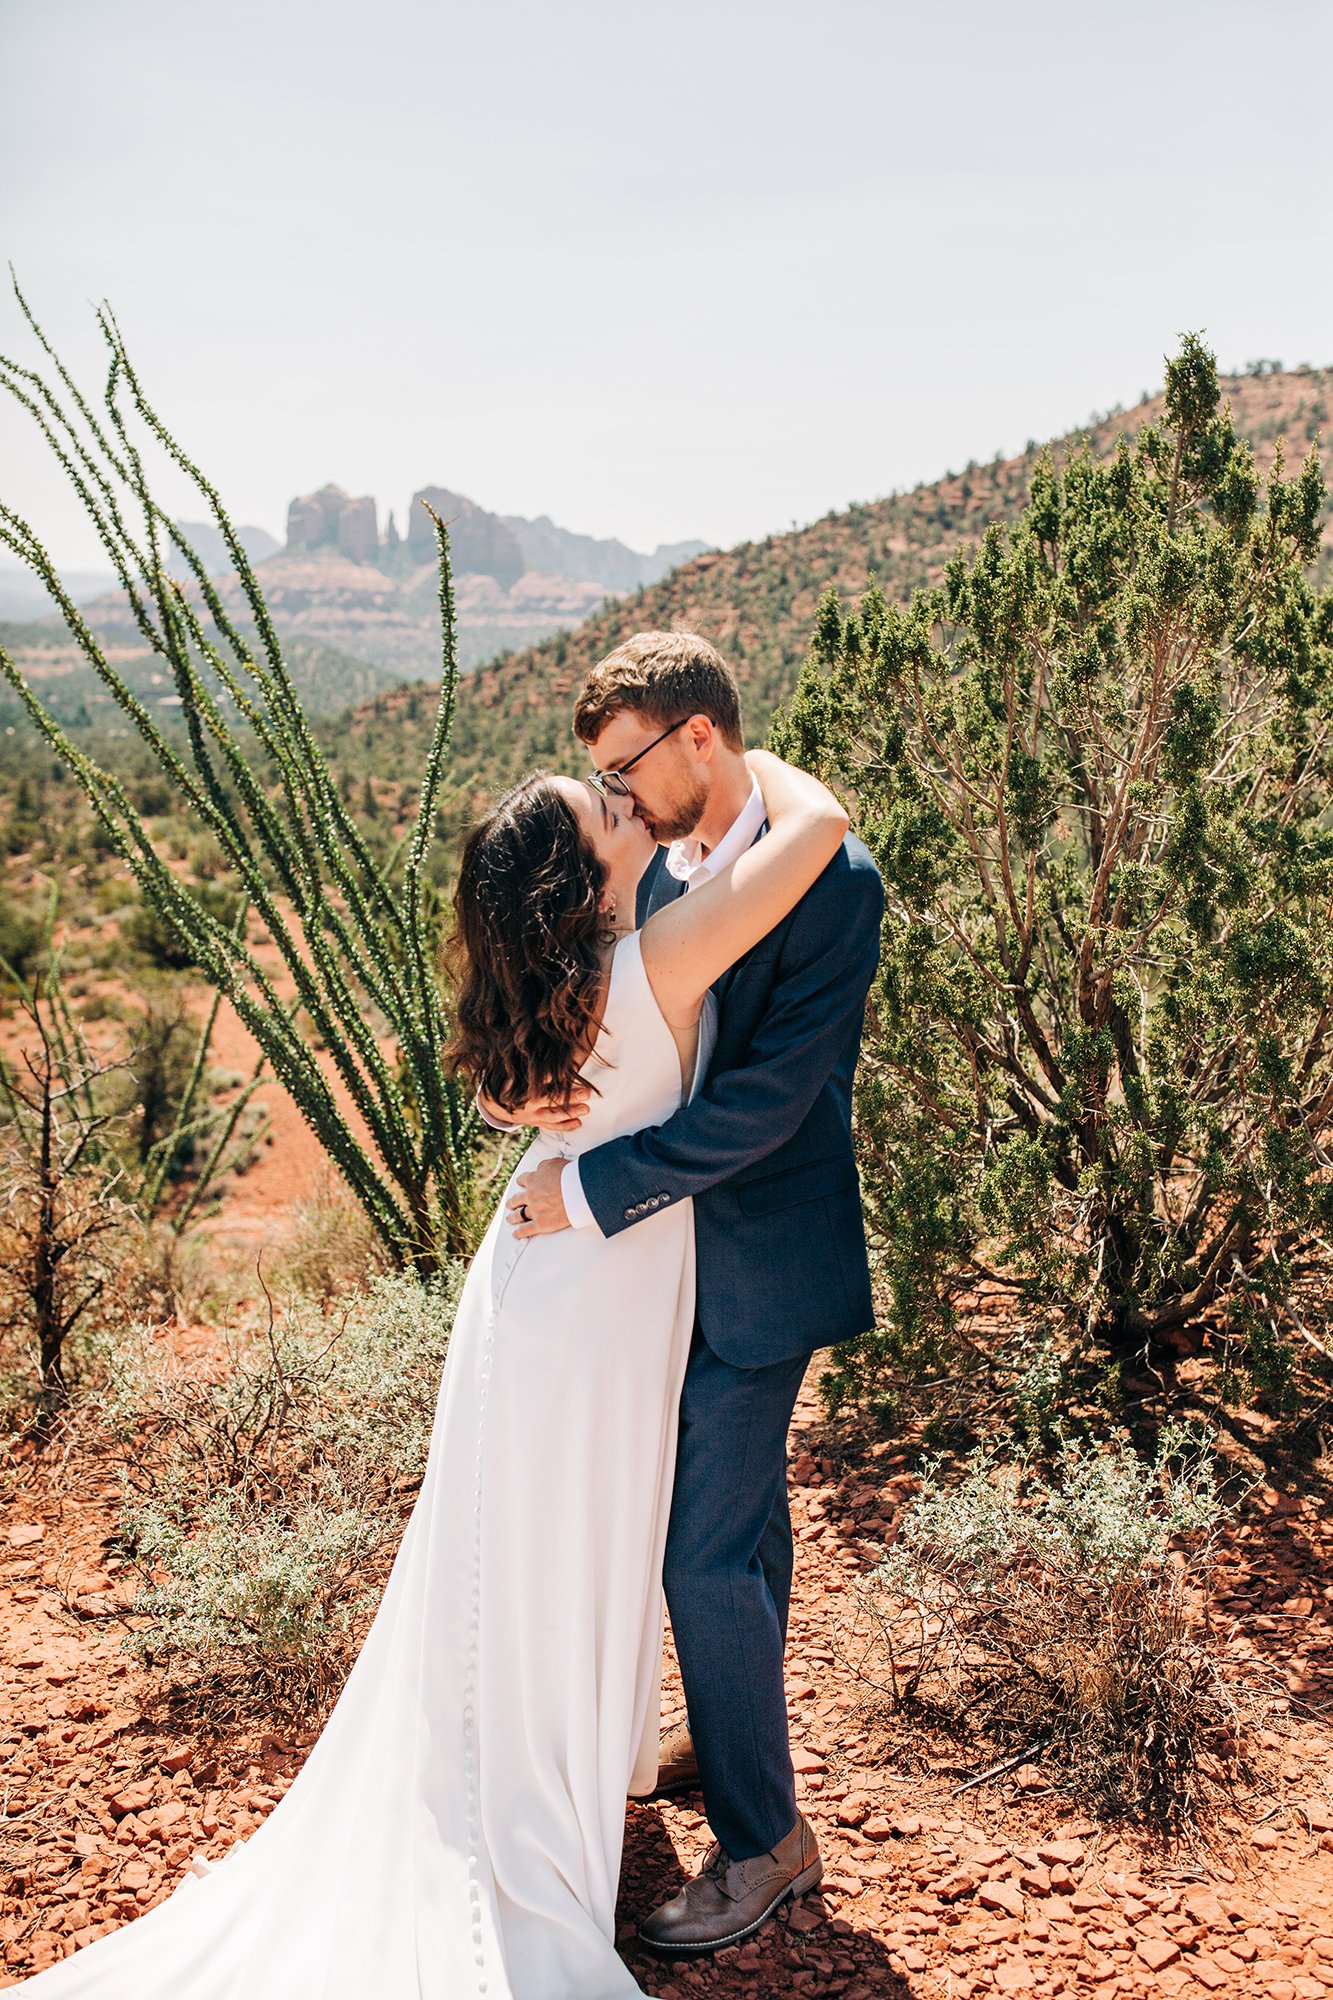 Newly weds Stephanie and Matt give each other a big kiss after their Sedona elopement